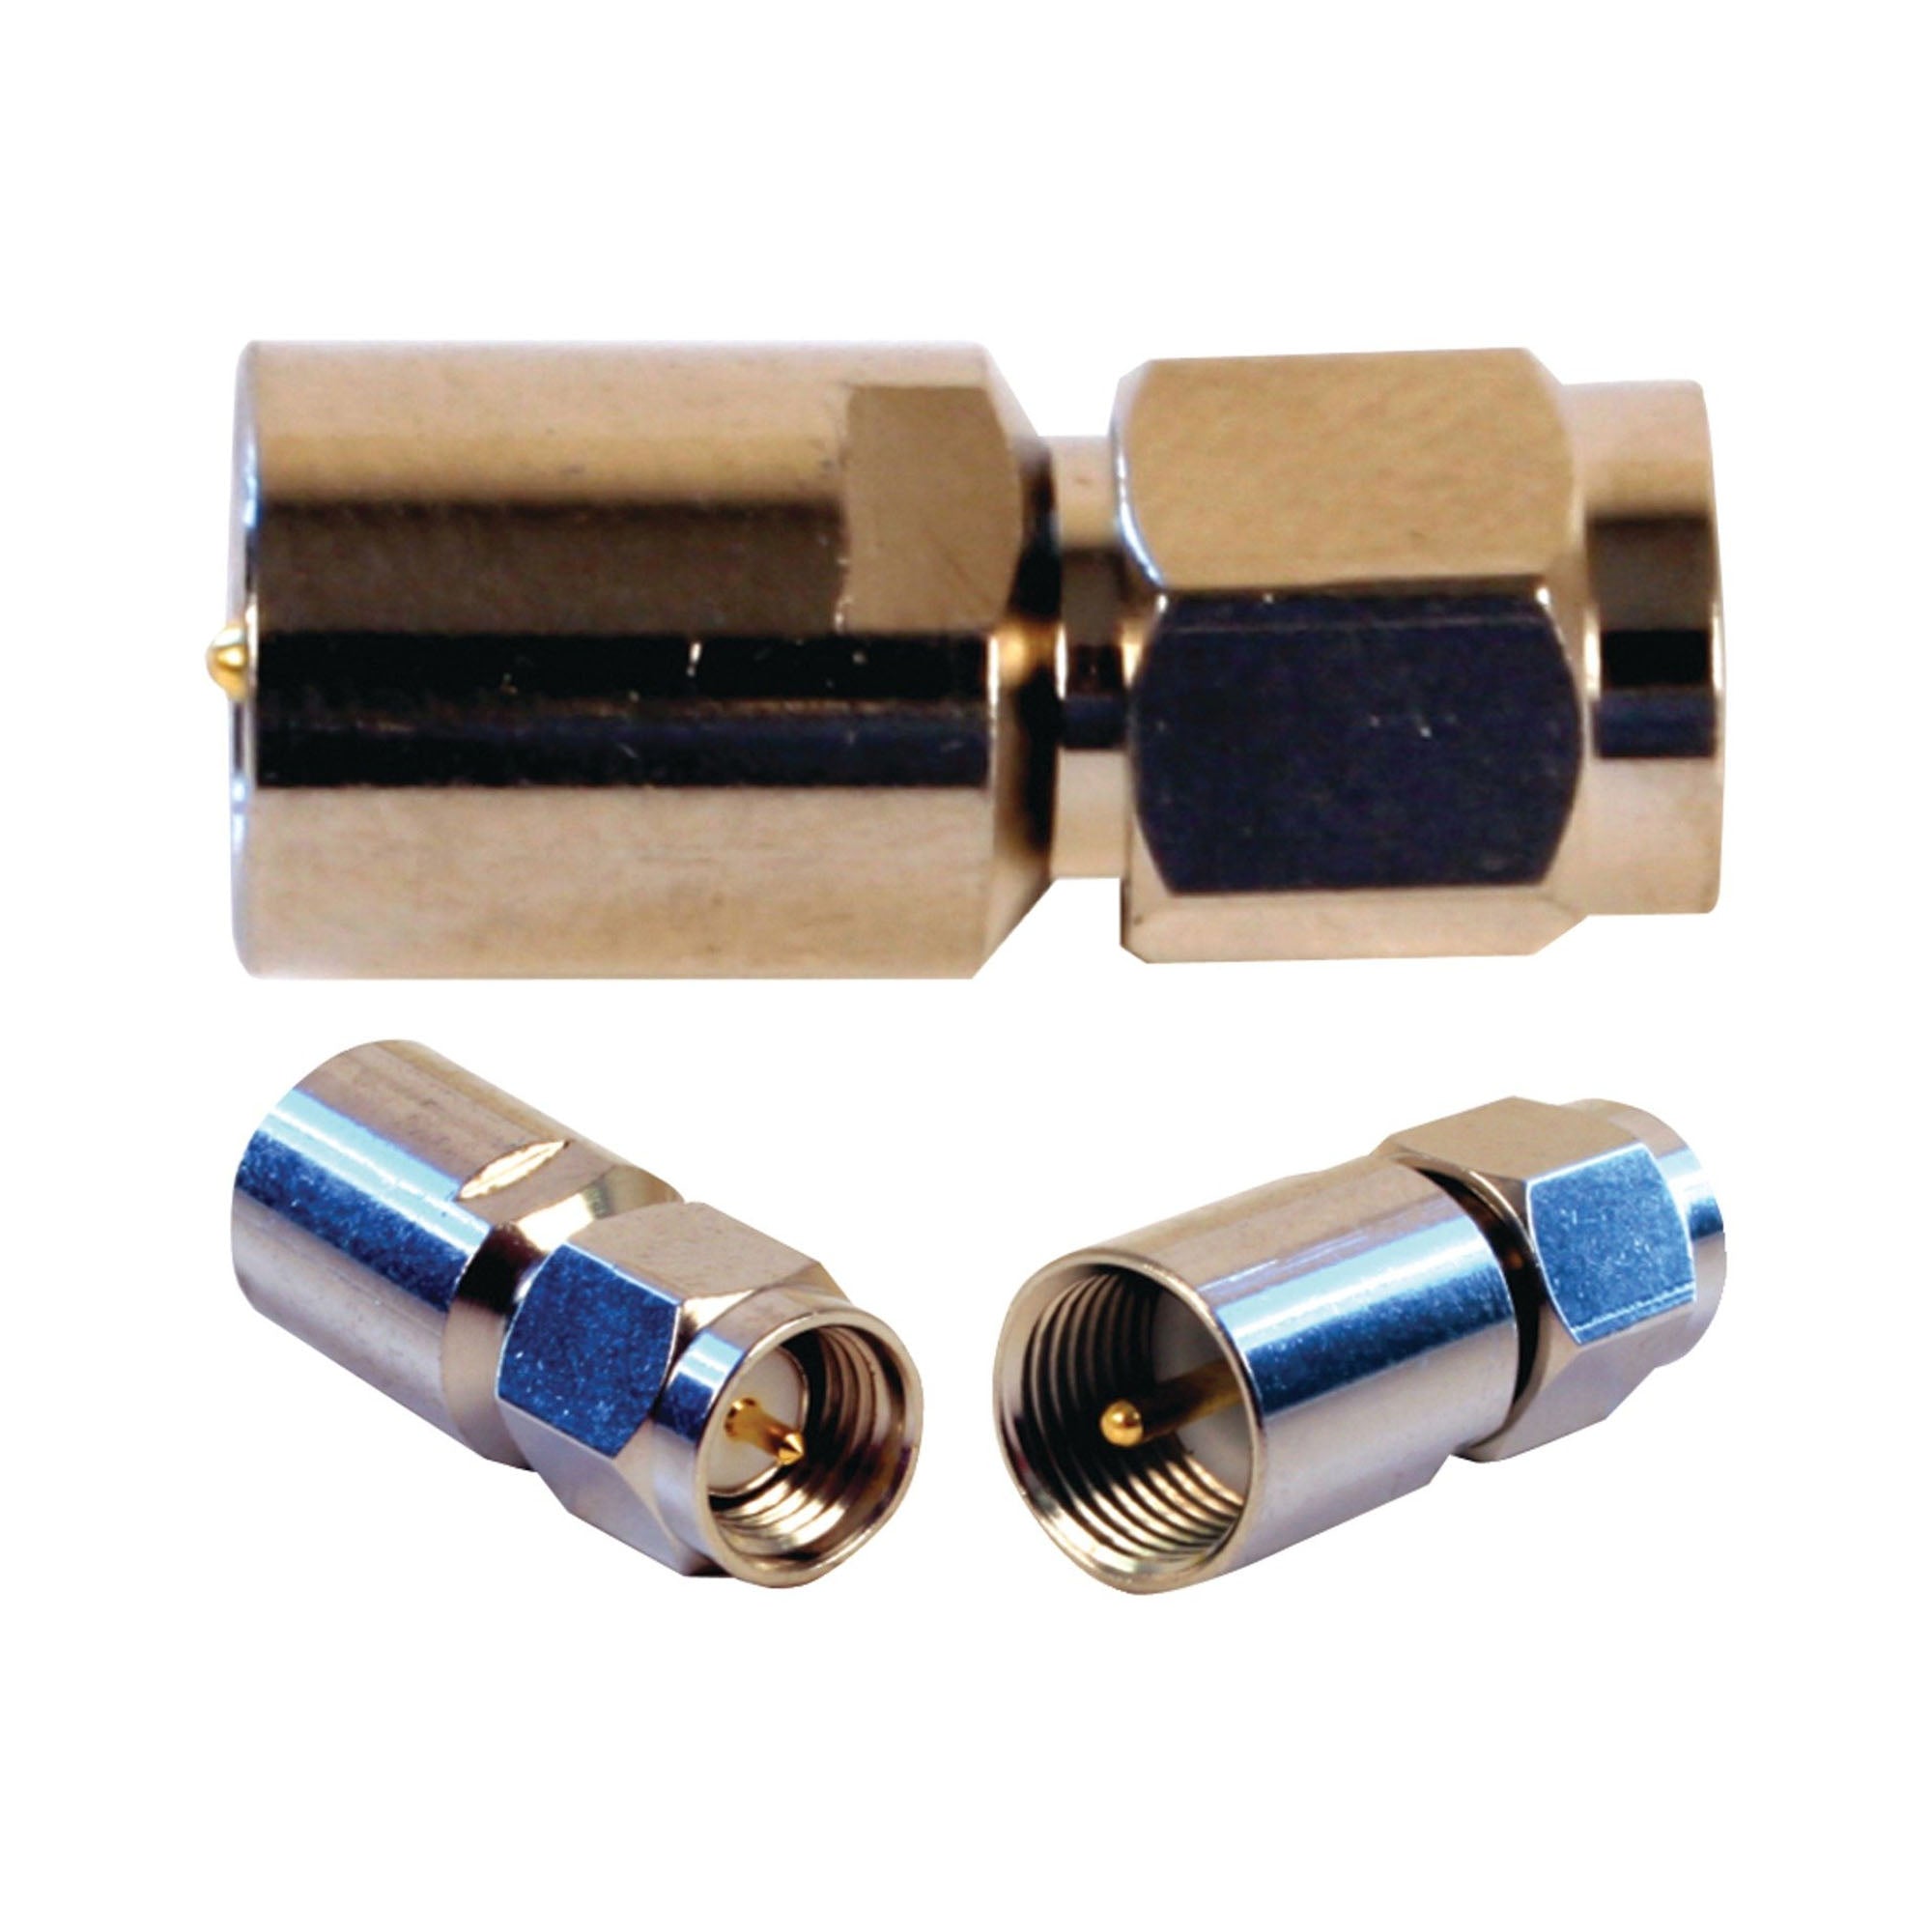 Wilson FME male - SMA male connector - 670WI971119